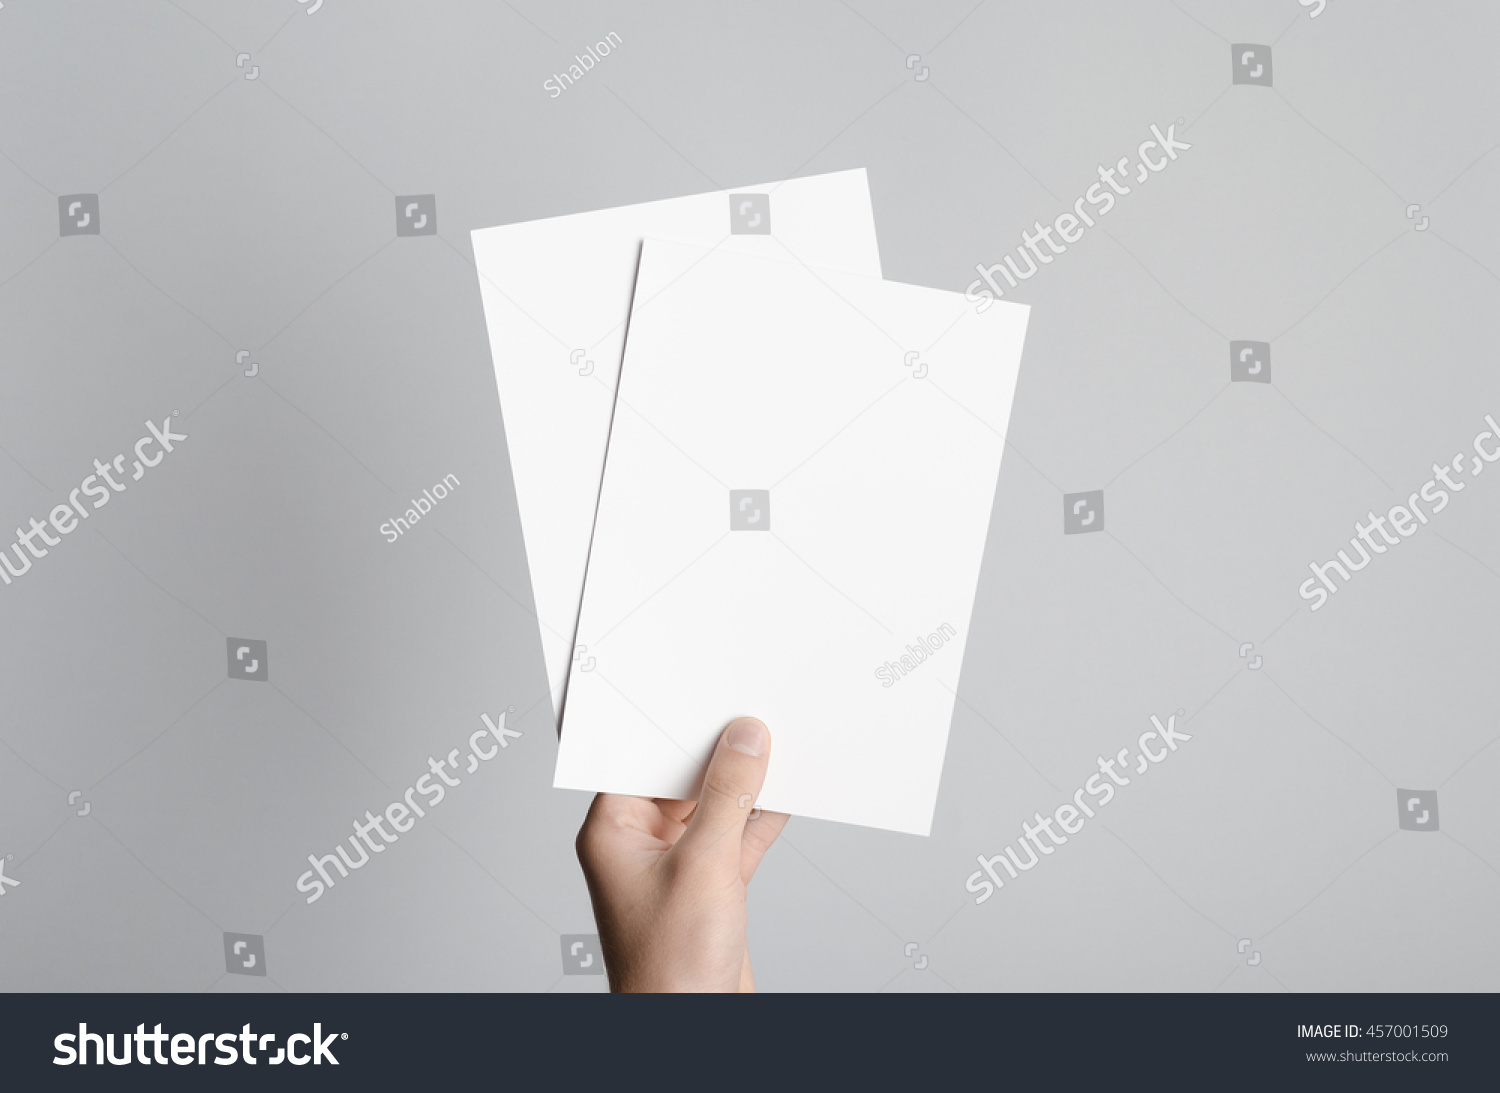 A5 Flyer / Invitation Mock-Up - Male hands holding blank flyers on a gray background. #457001509